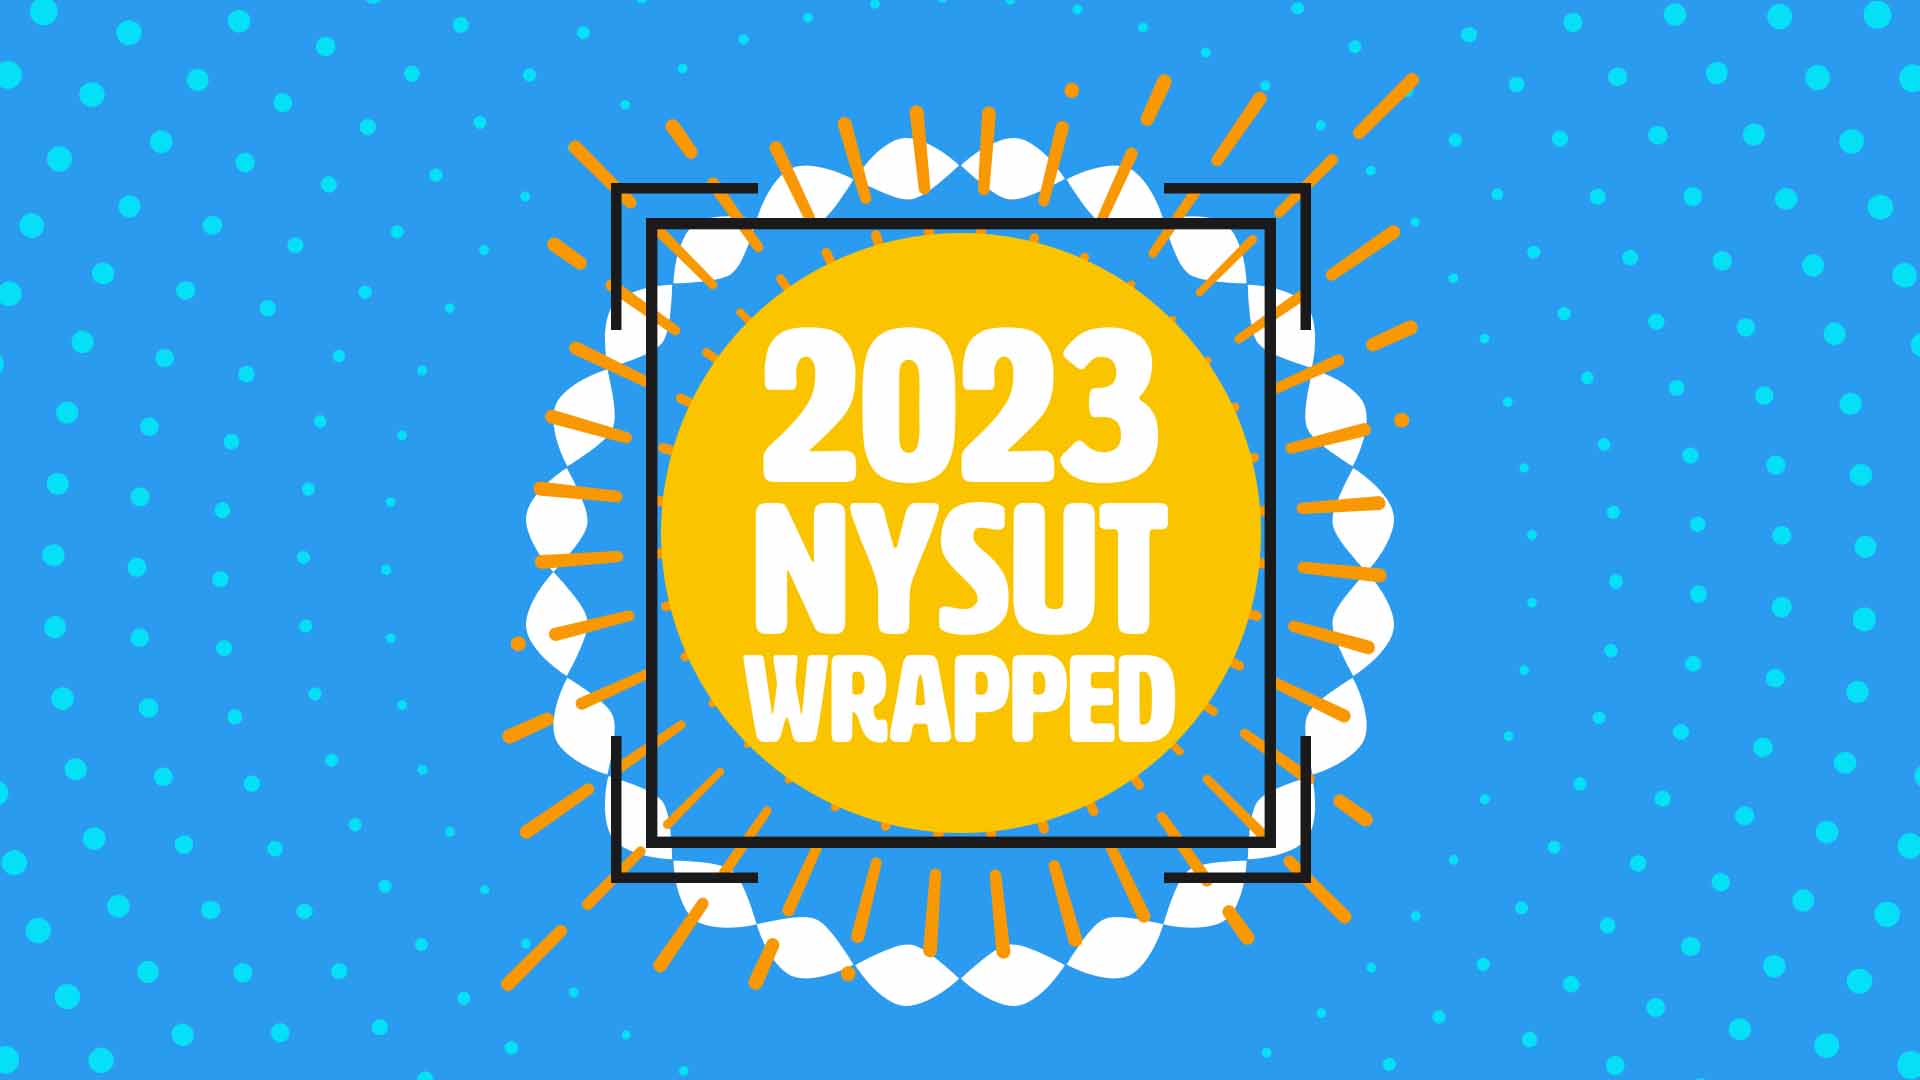 nysut wrapped 2023